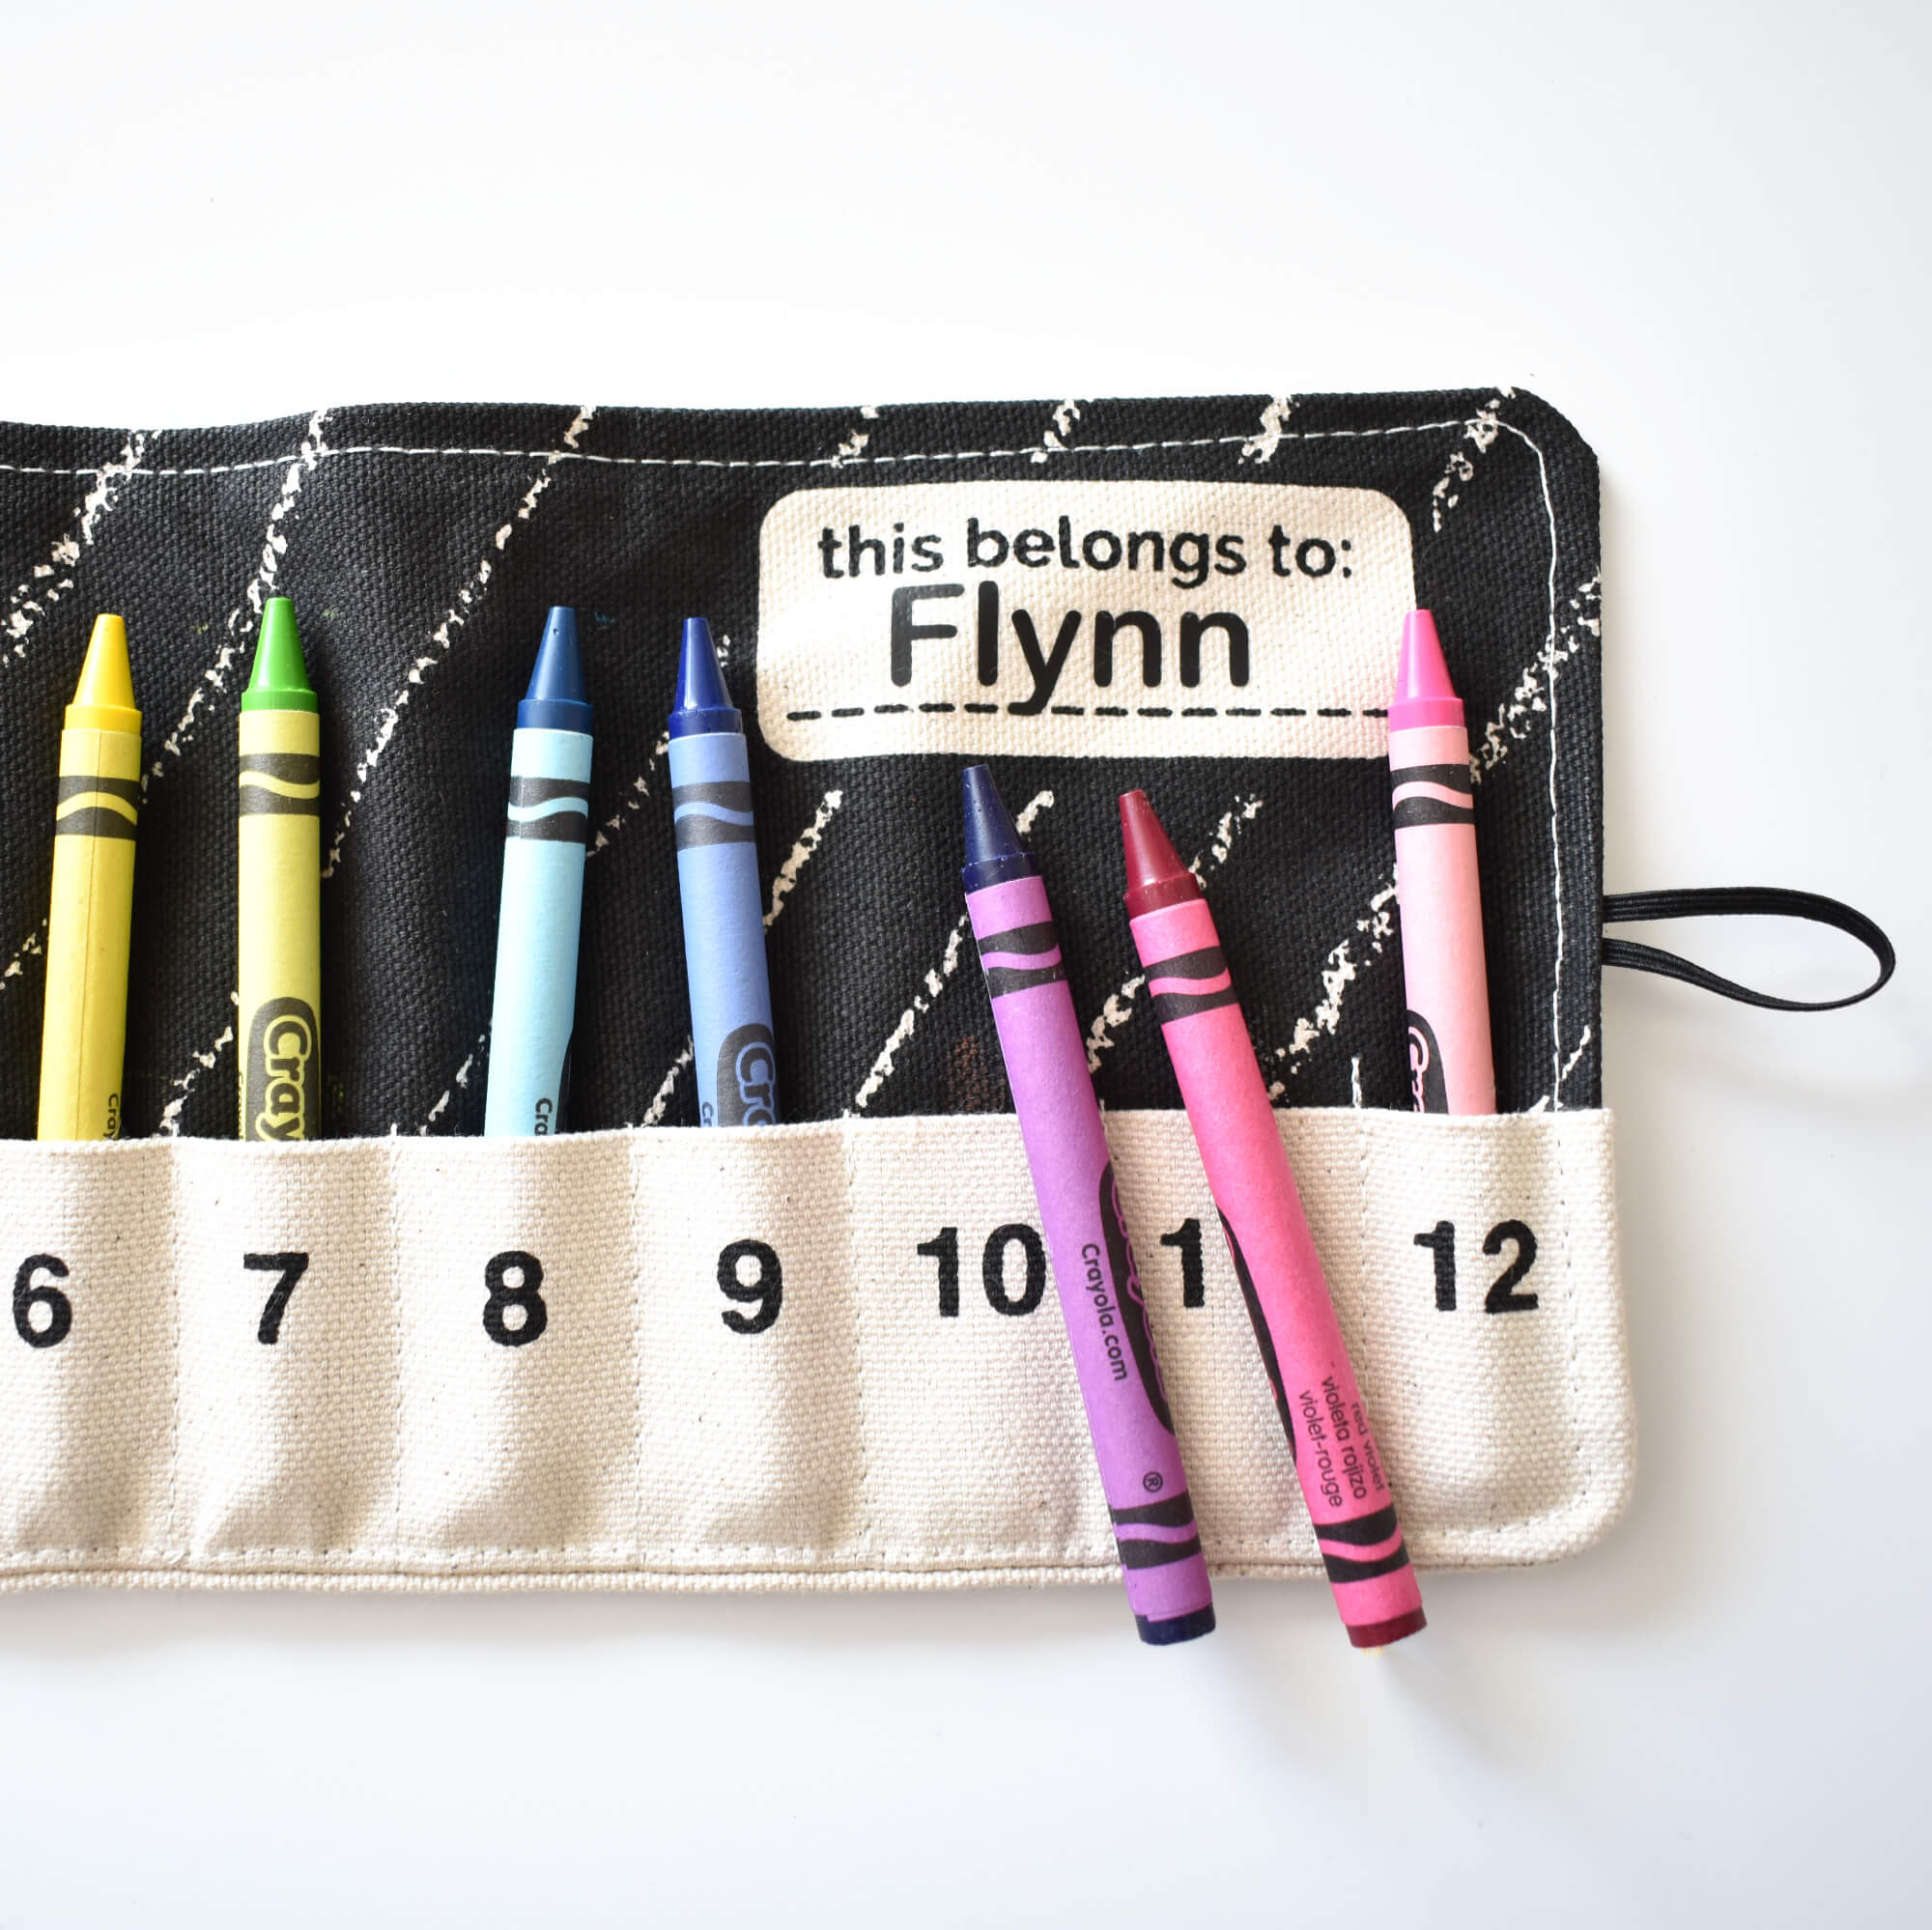 Holder for Crayons